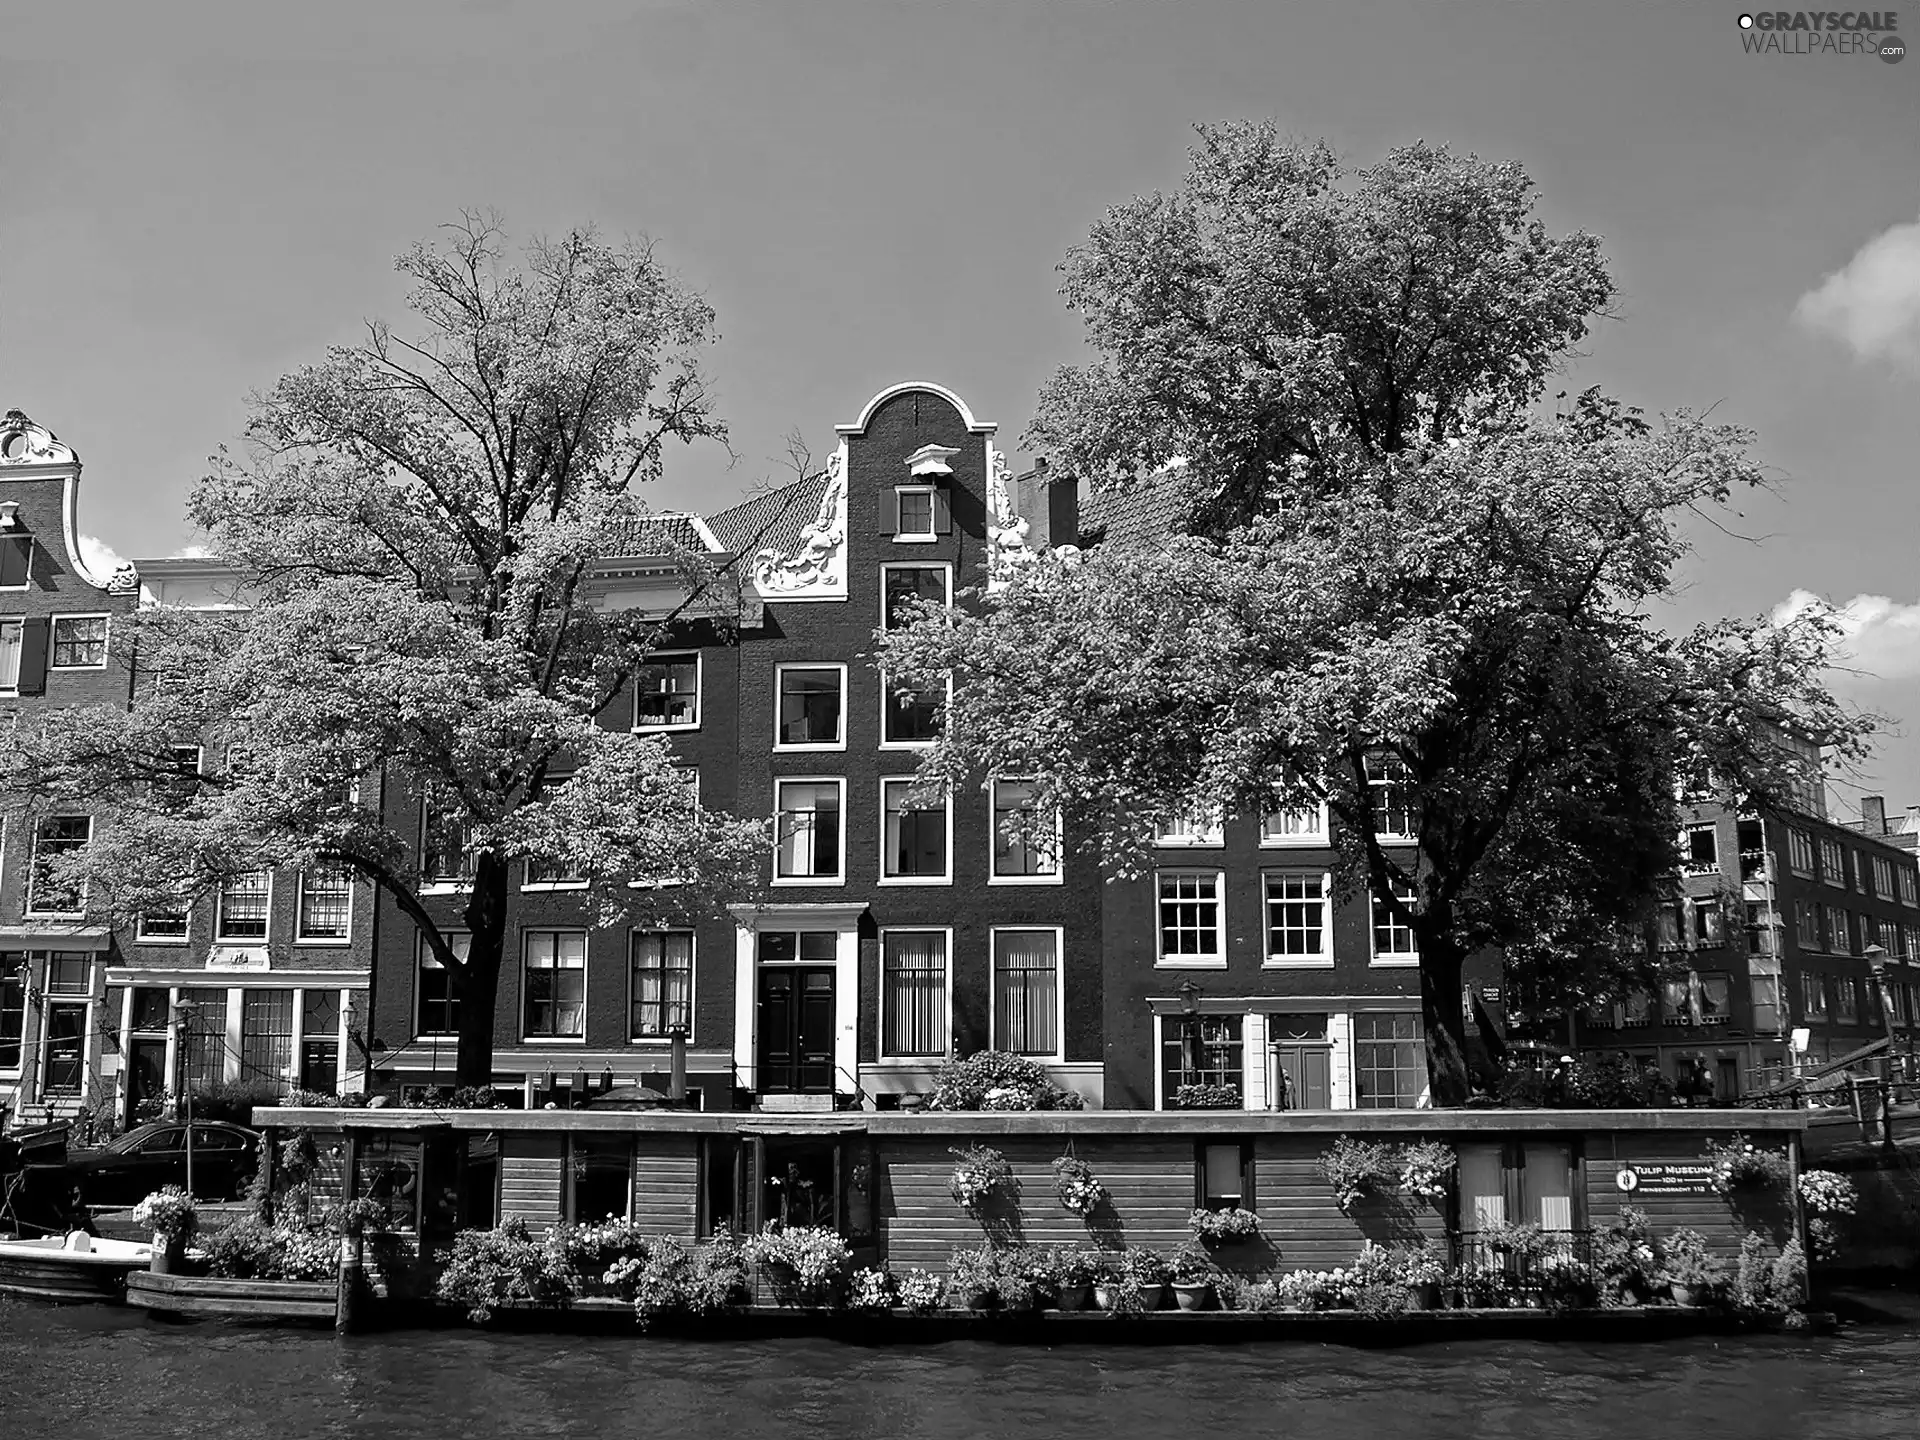 fragment, summer, Amsterdam, apartment house, on The Water, Boat, canal, house, VEGETATION